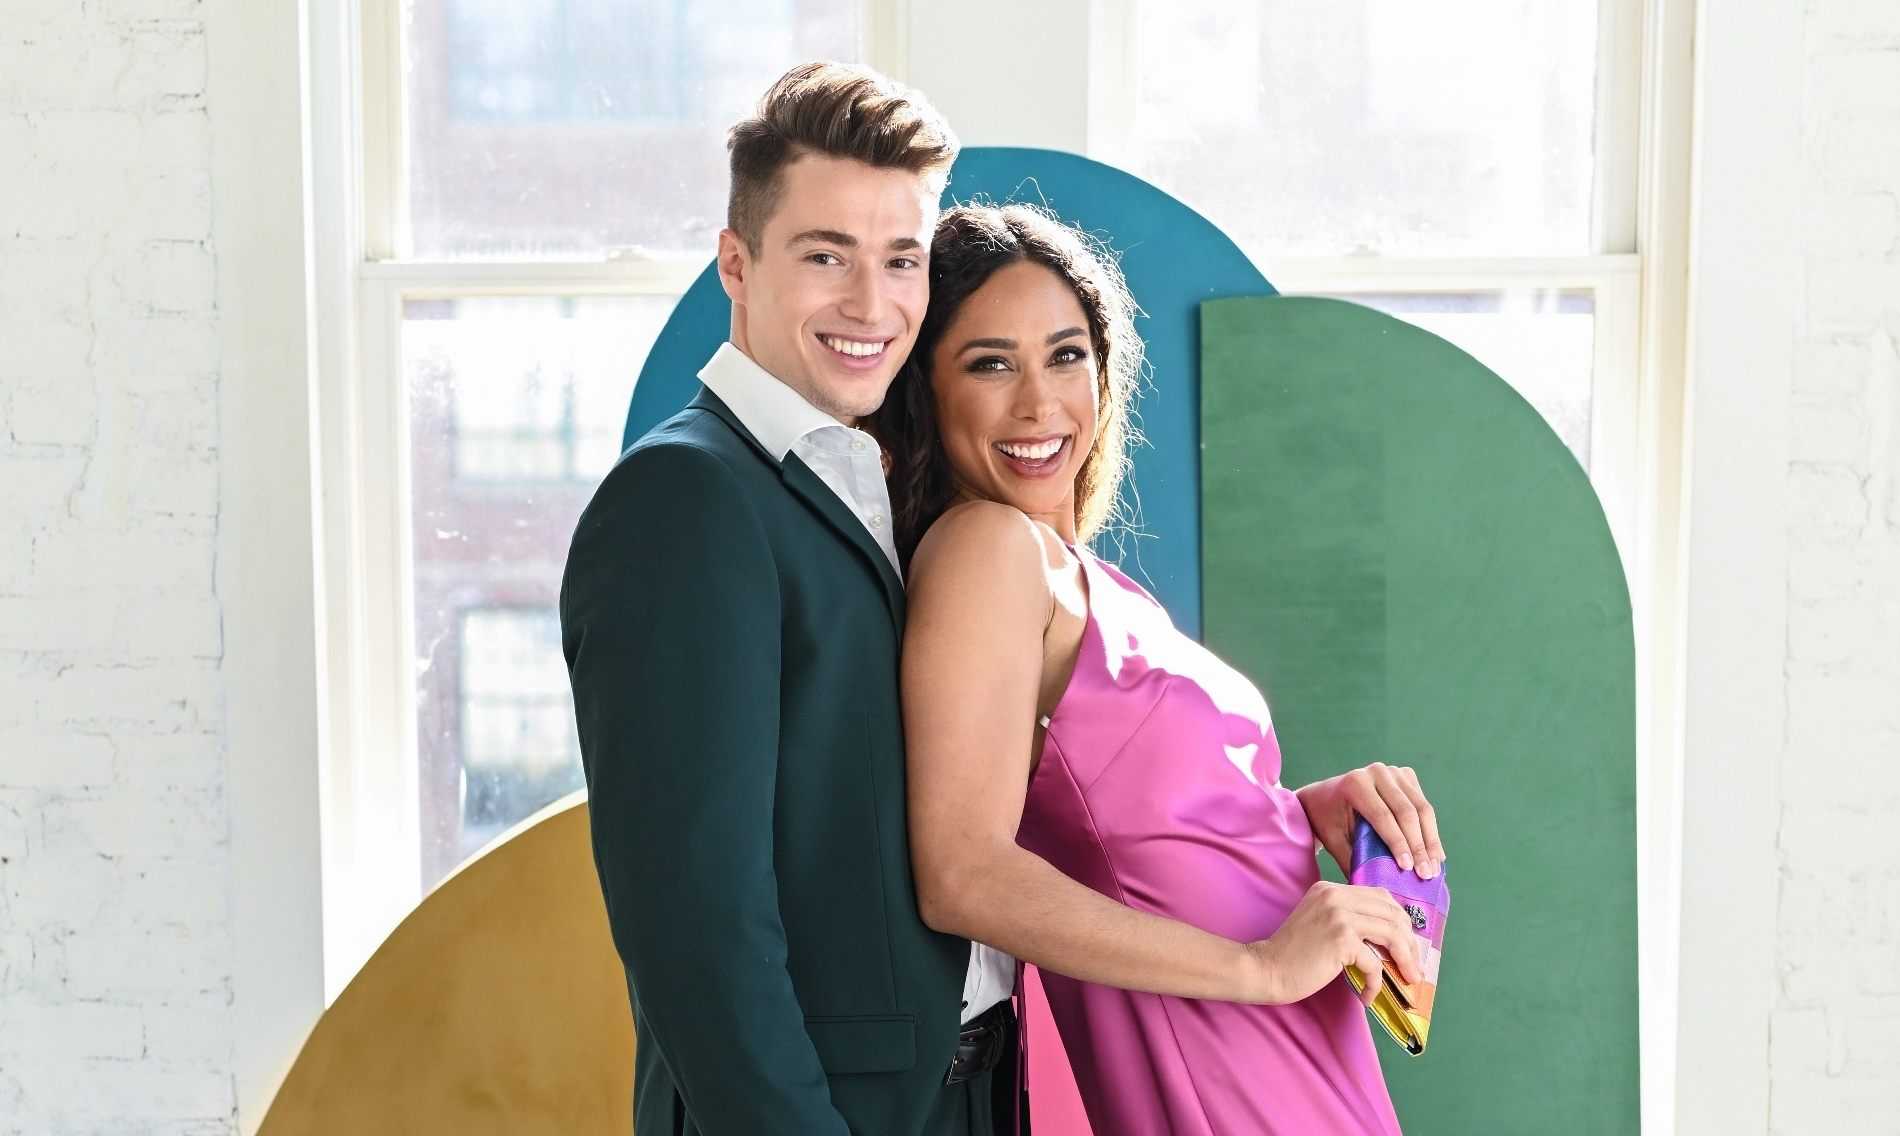 Bright prom date outfits with pink satin prom dress & dark hunter green prom suits for men.